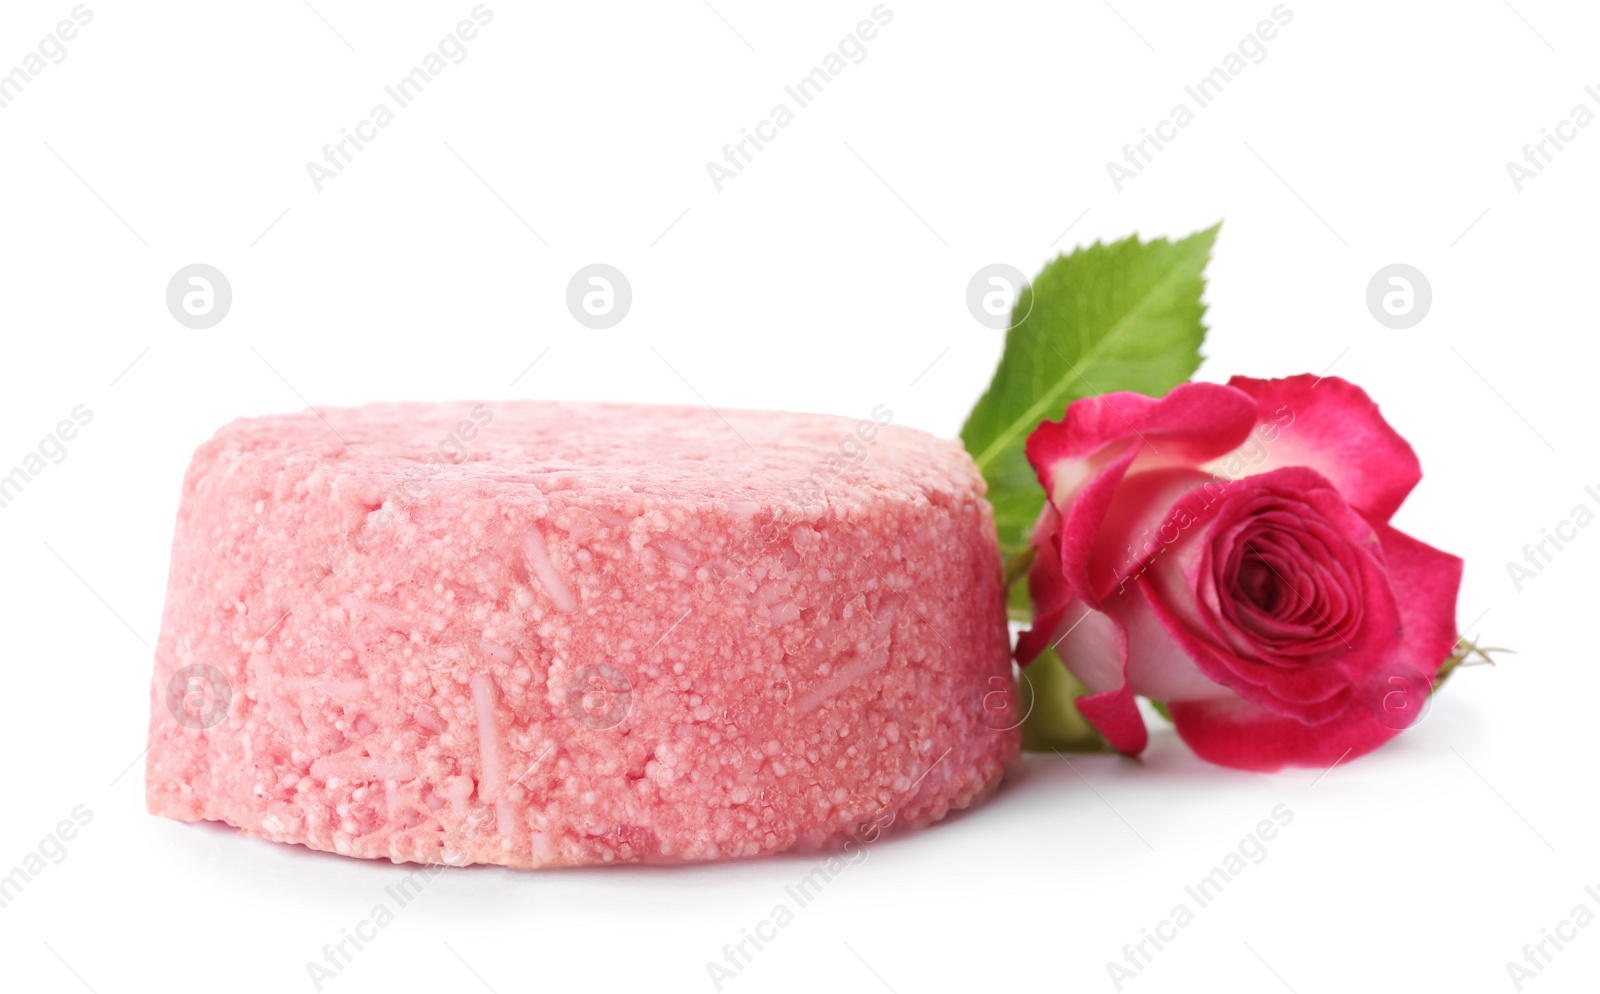 Photo of Solid shampoo bar and rose on white background. Hair care